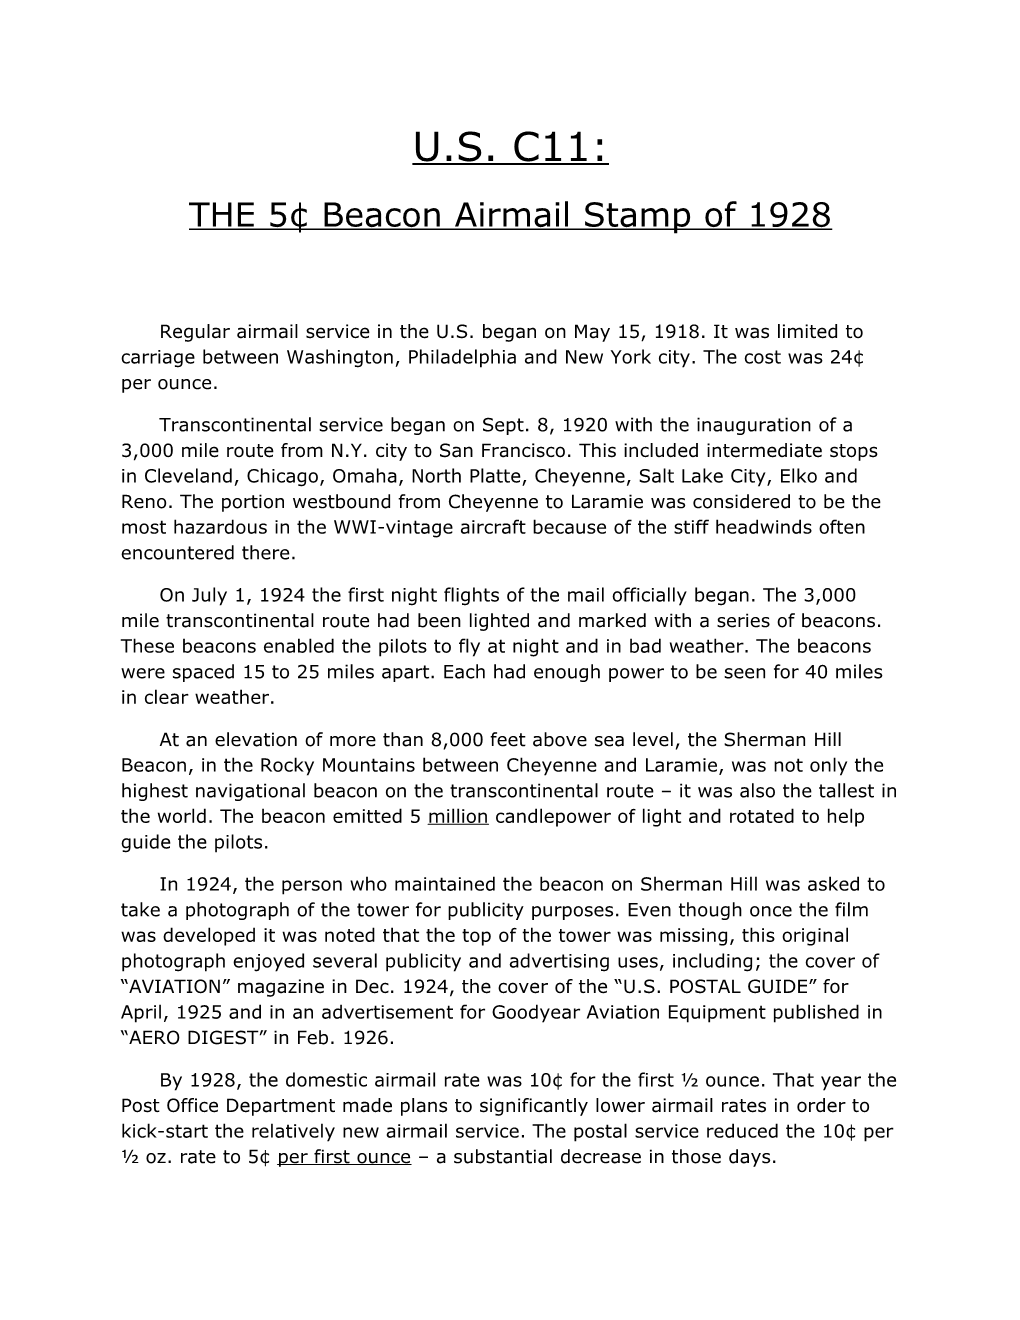 THE 5 Beacon Airmail Stamp of 1928